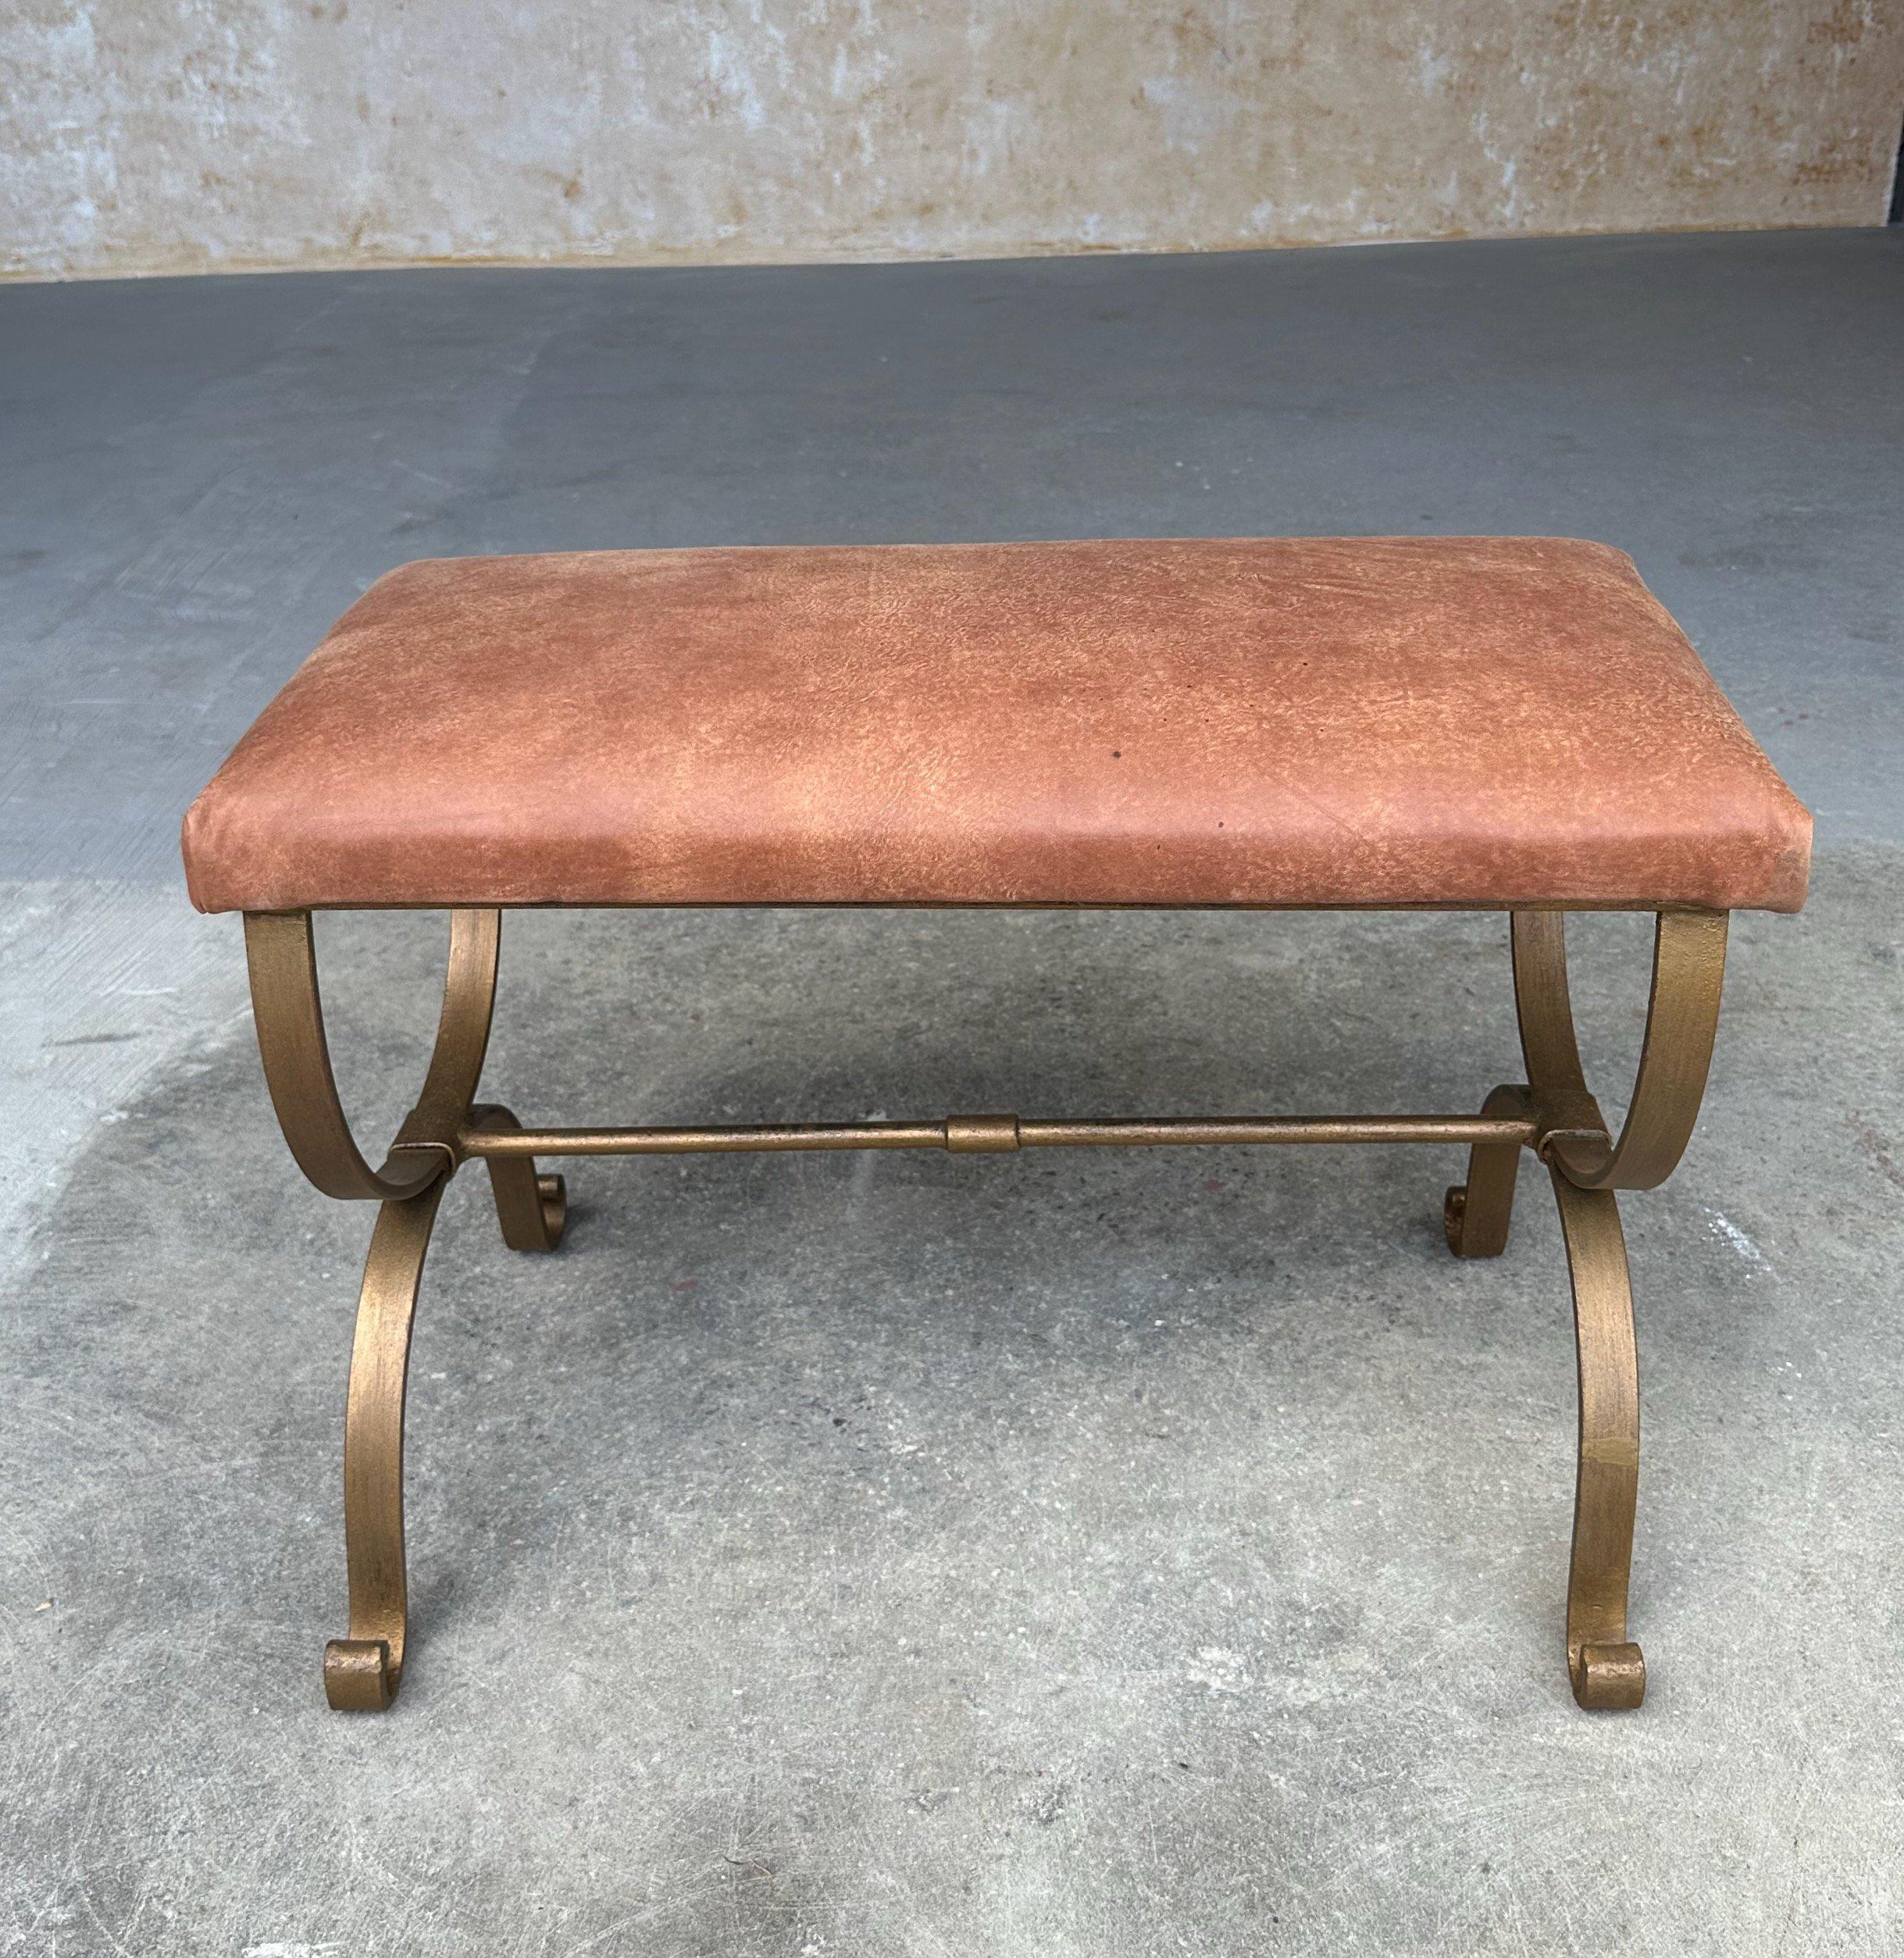 Contemporary Spanish Gilt Iron Bench in Brown Leather